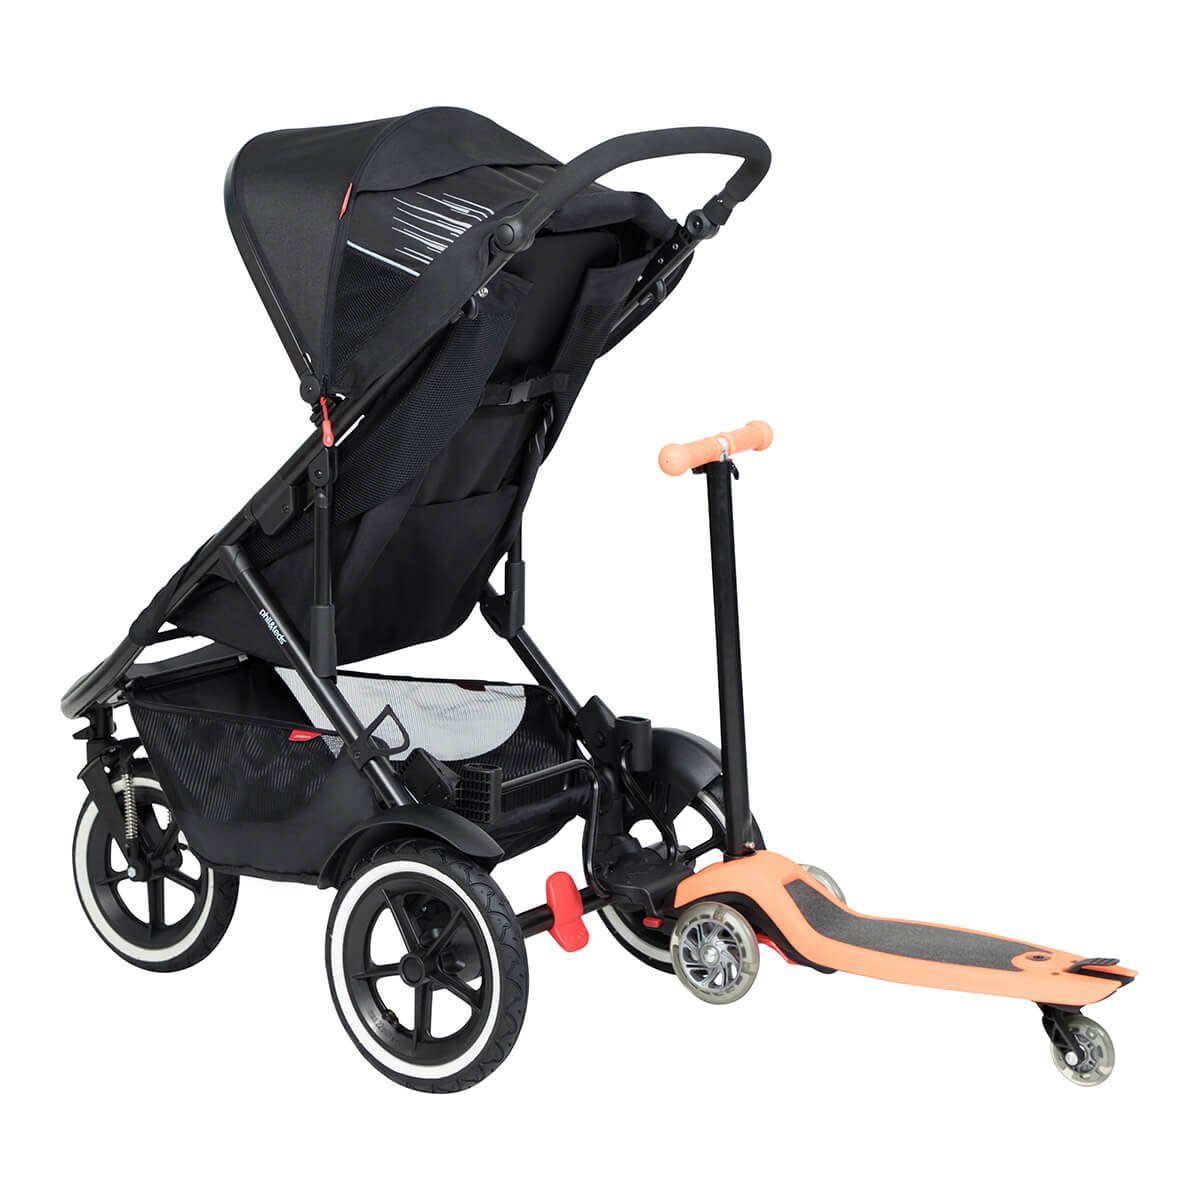 https://cdn.accentuate.io/4417306918946/19437753860274/philteds-sport-buggy-with-freerider-stroller-board-in-rear-v1626482808959.jpg?1200x1200